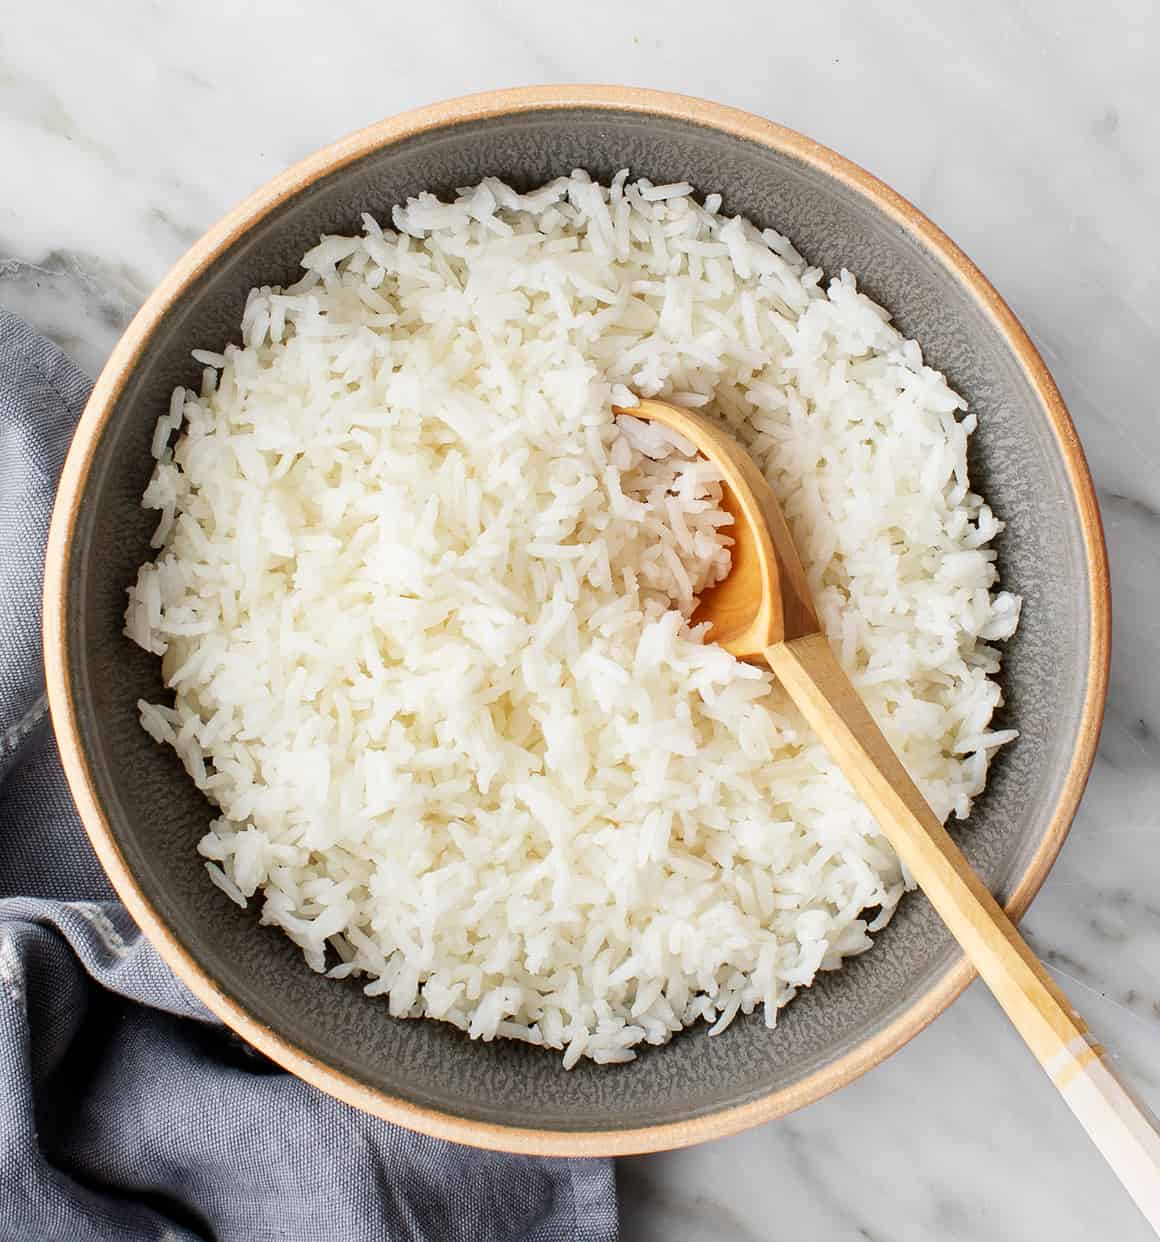 Elevate Your Rice Game: A Secret from the Kitchens of Restaurants